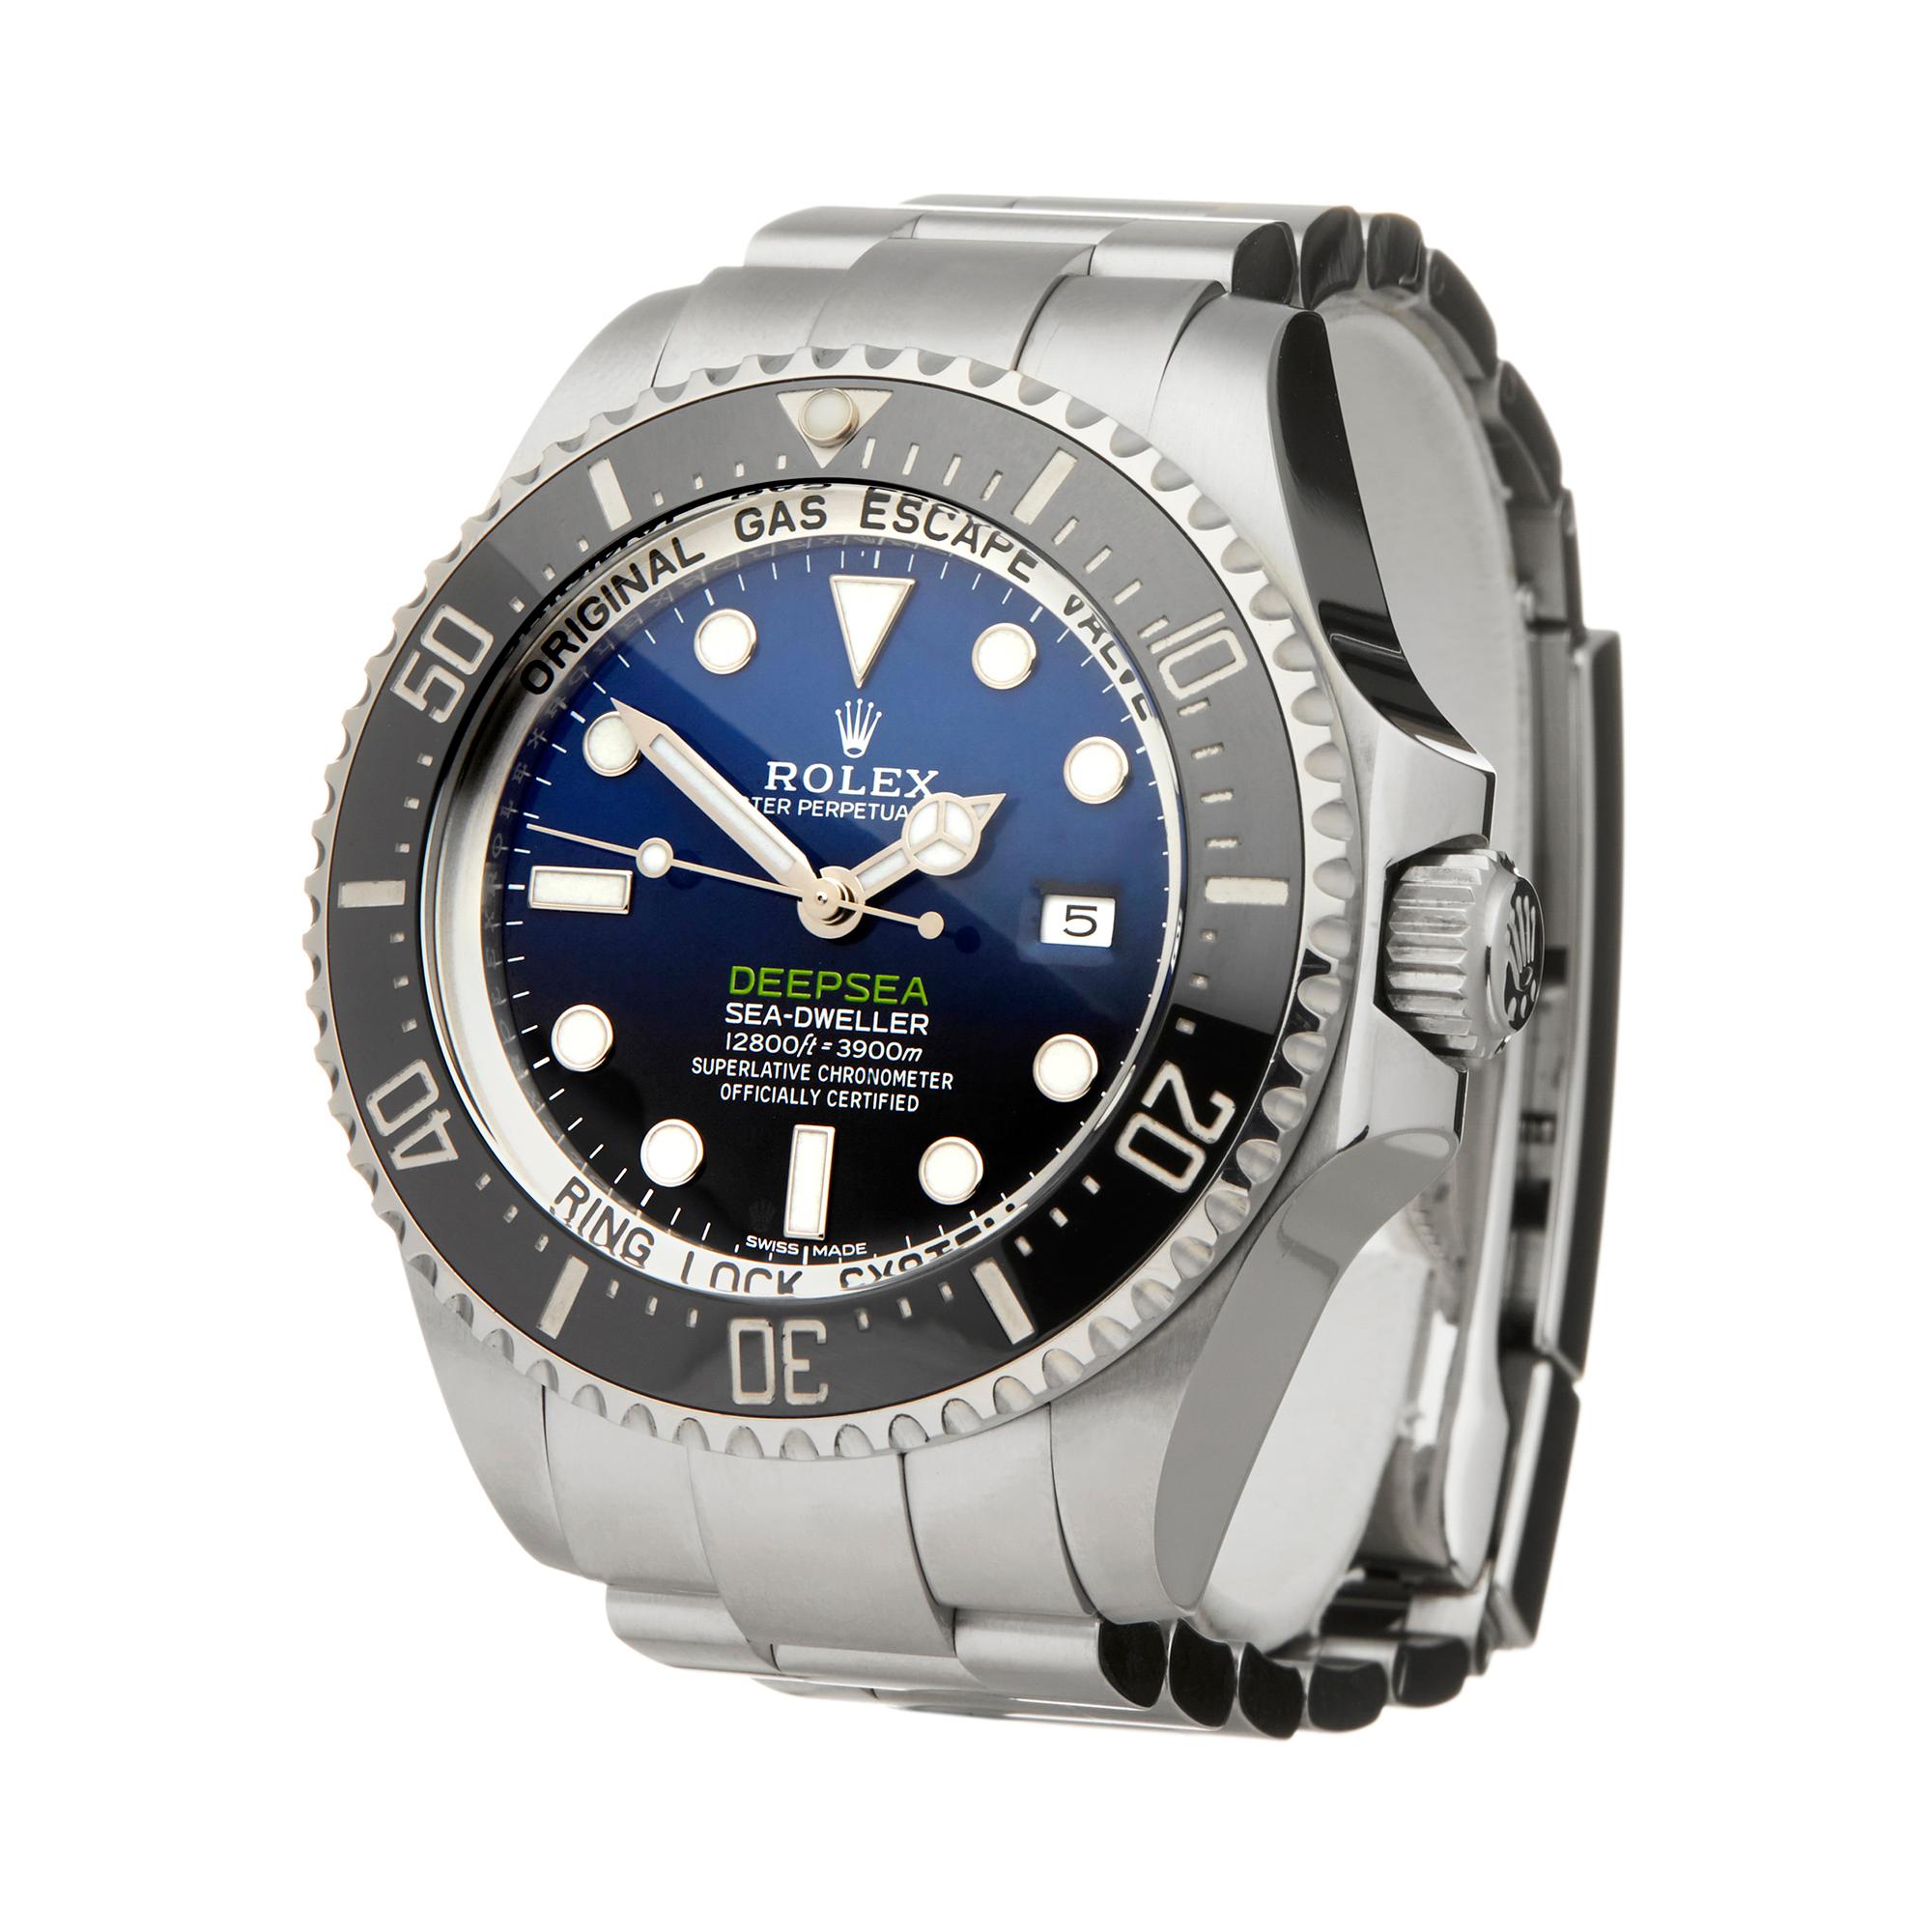 Reference: W6012
Manufacturer: Rolex
Model: Sea-Dweller Deepsea
Model Reference: 116660
Age: 14th February 2018
Gender: Men's
Box and Papers: Box, Manuals and Guarantee
Dial: Blue
Glass: Sapphire Crystal
Movement:Automatic
Water Resistance: To